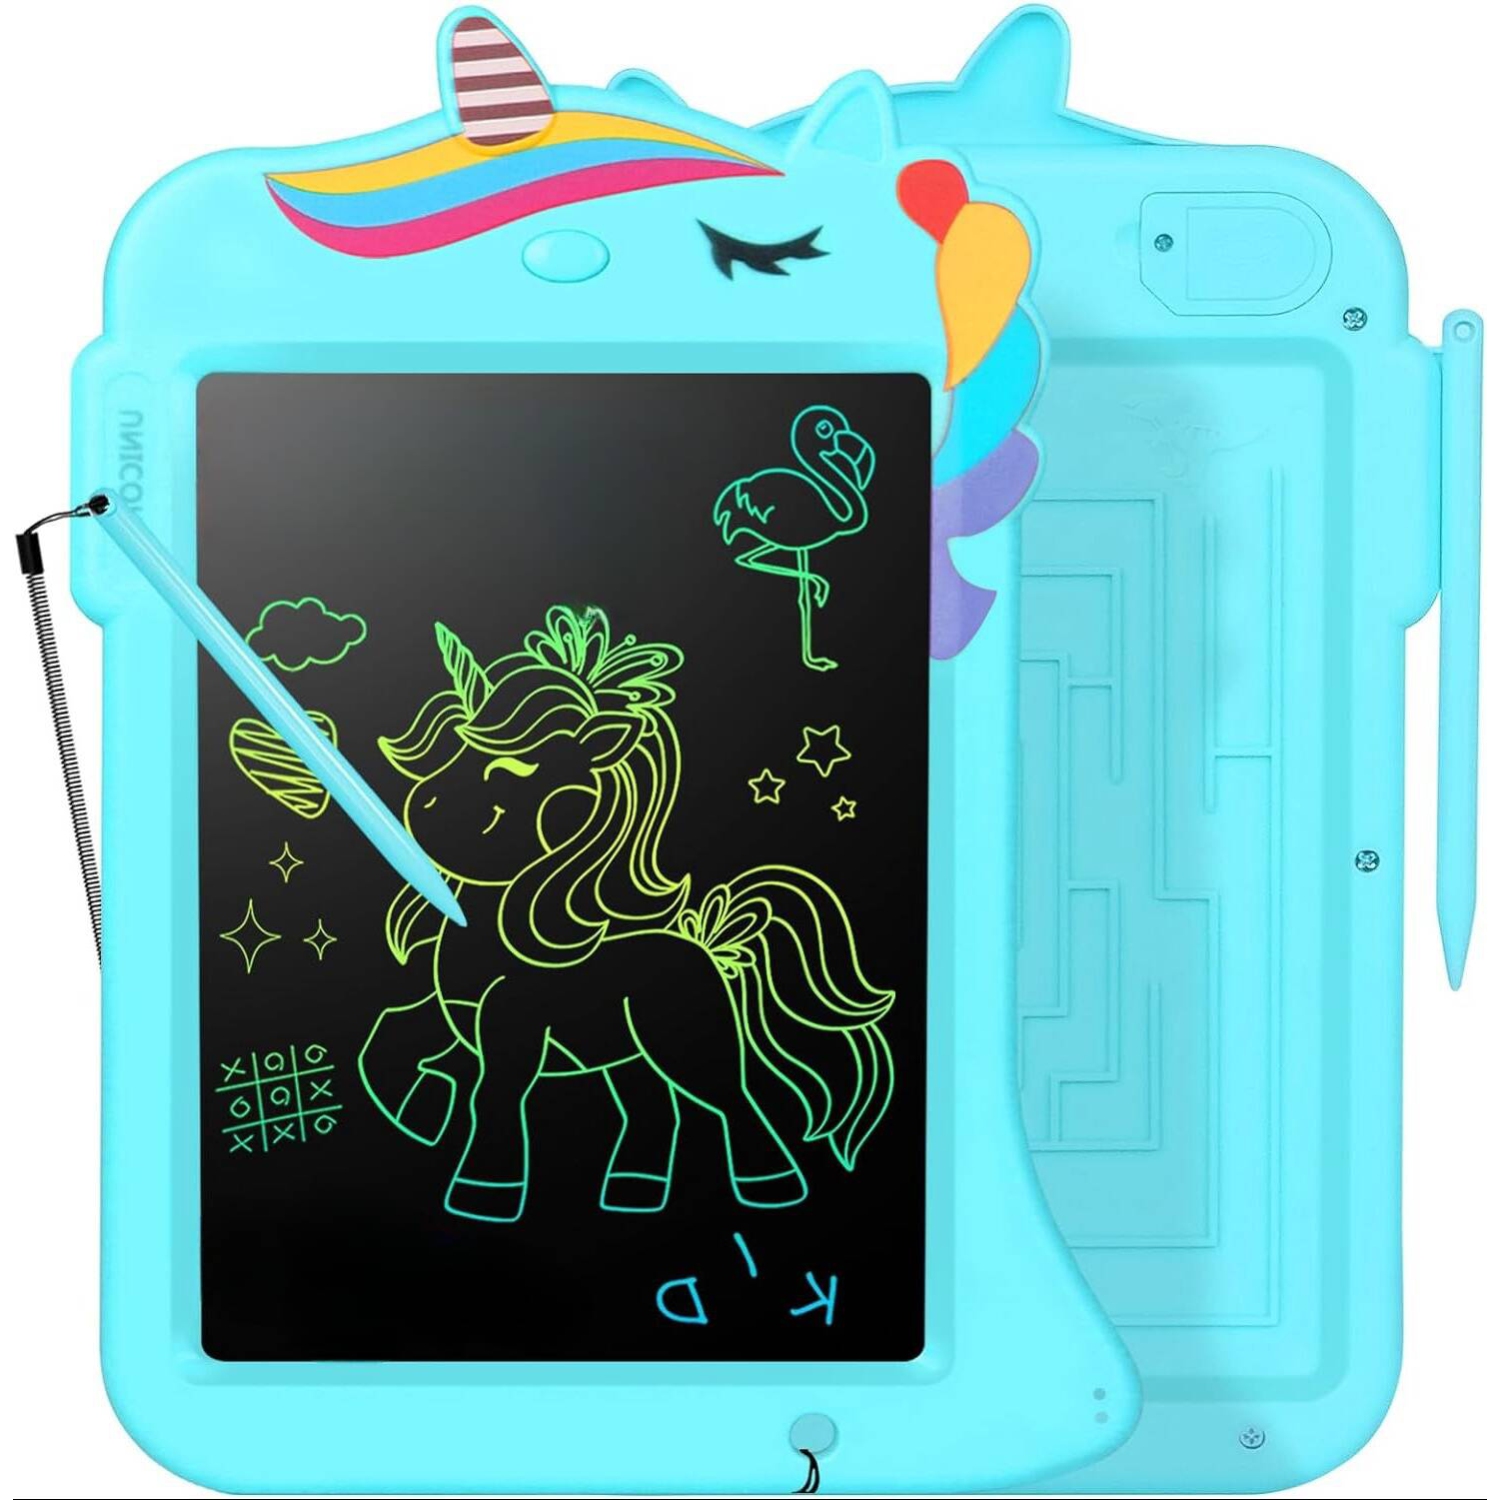 LCD Drawing Writing Tablet, Drawing Pad for Kids Toddlers Drawing Toy Educational Learning Toys Birthday Gift for 2 -8 Year Old Kids, Blue